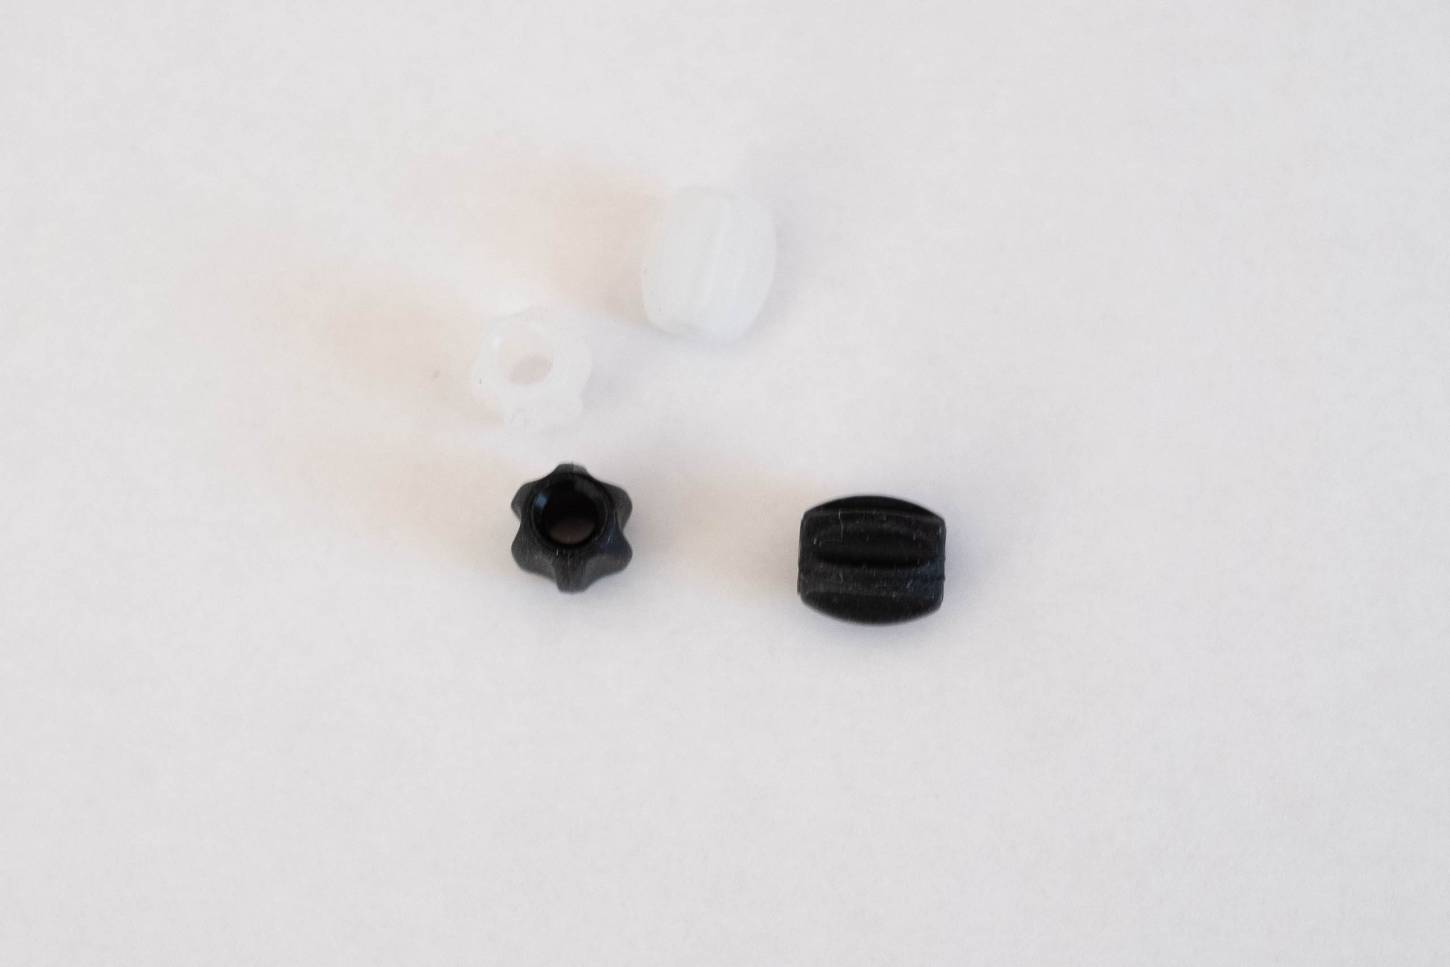 1x Jagwire frame protector Mini Tube Top silicone in black or transparent